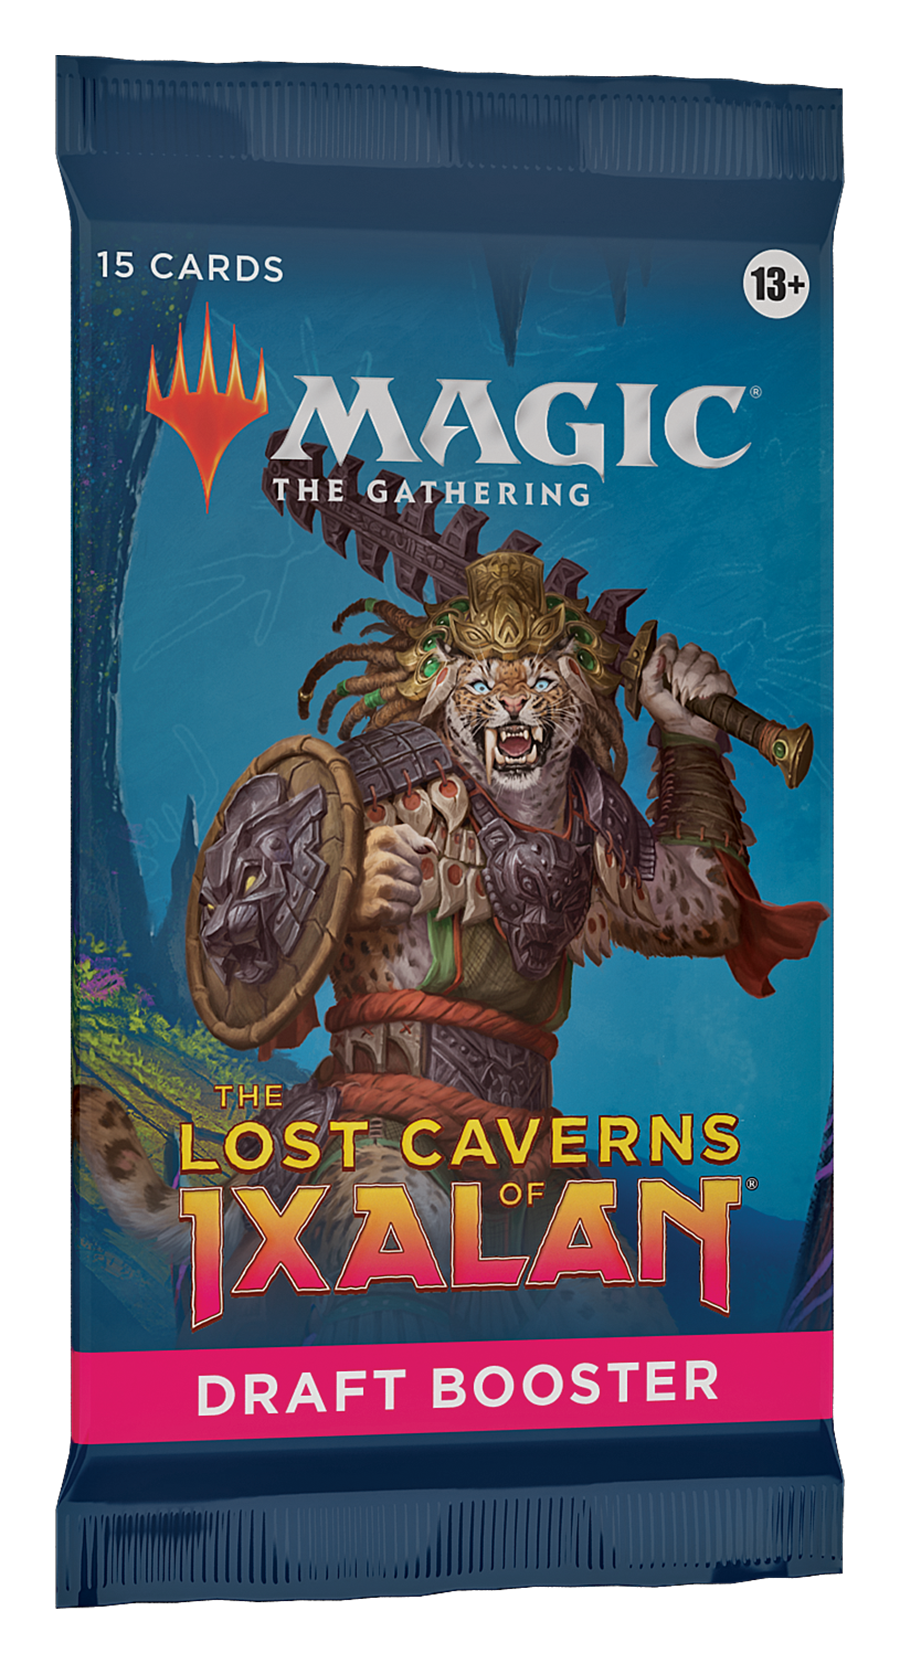 The Lost Caverns of Ixalan Draft Booster